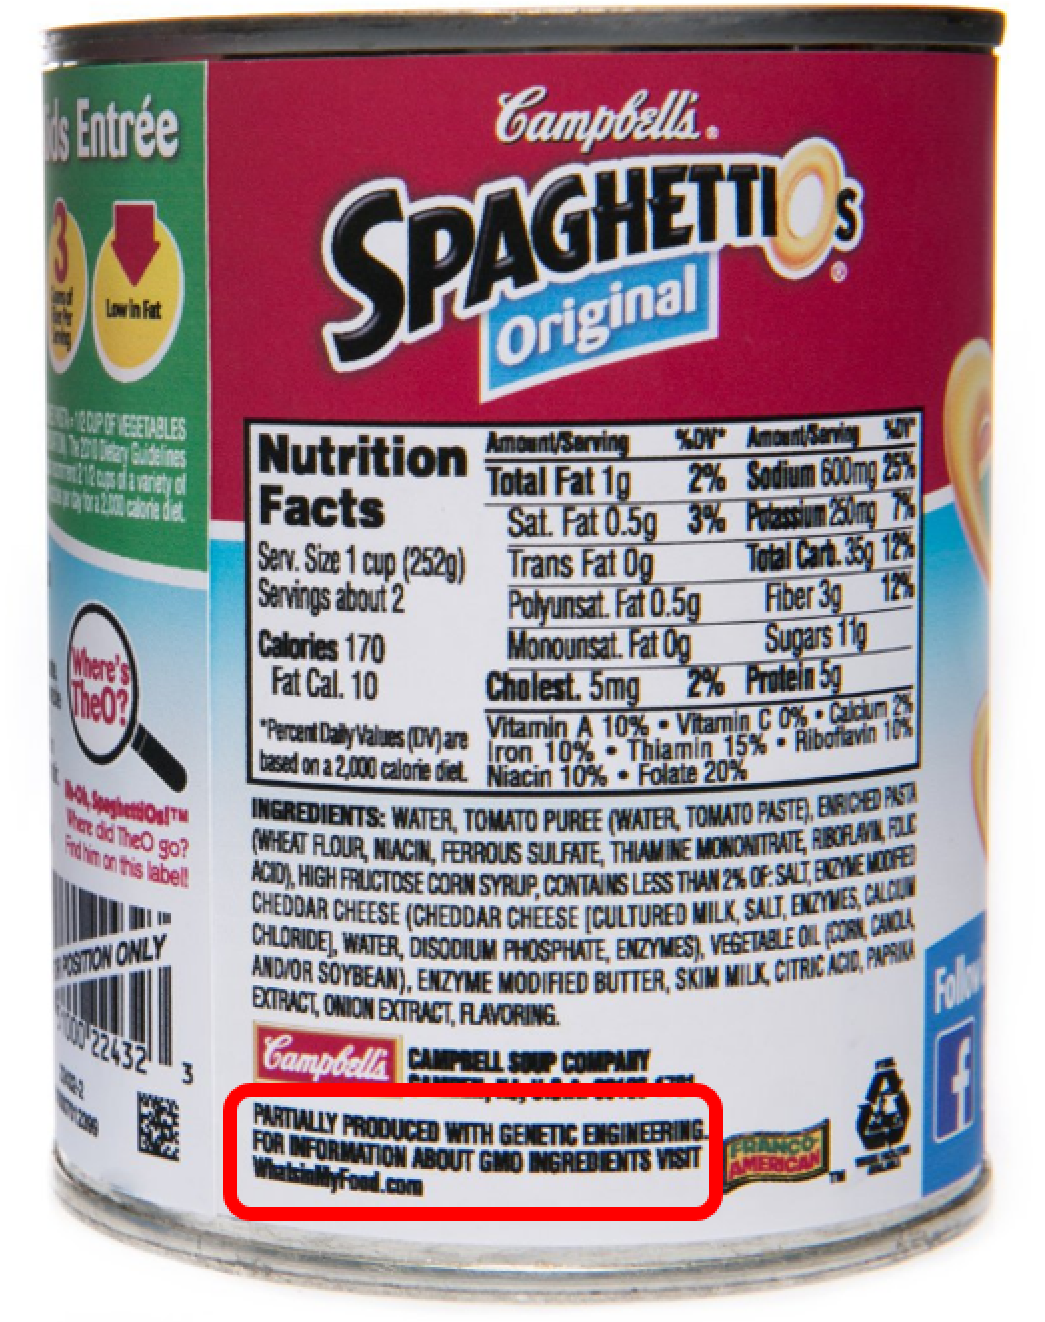 genetically modified food label